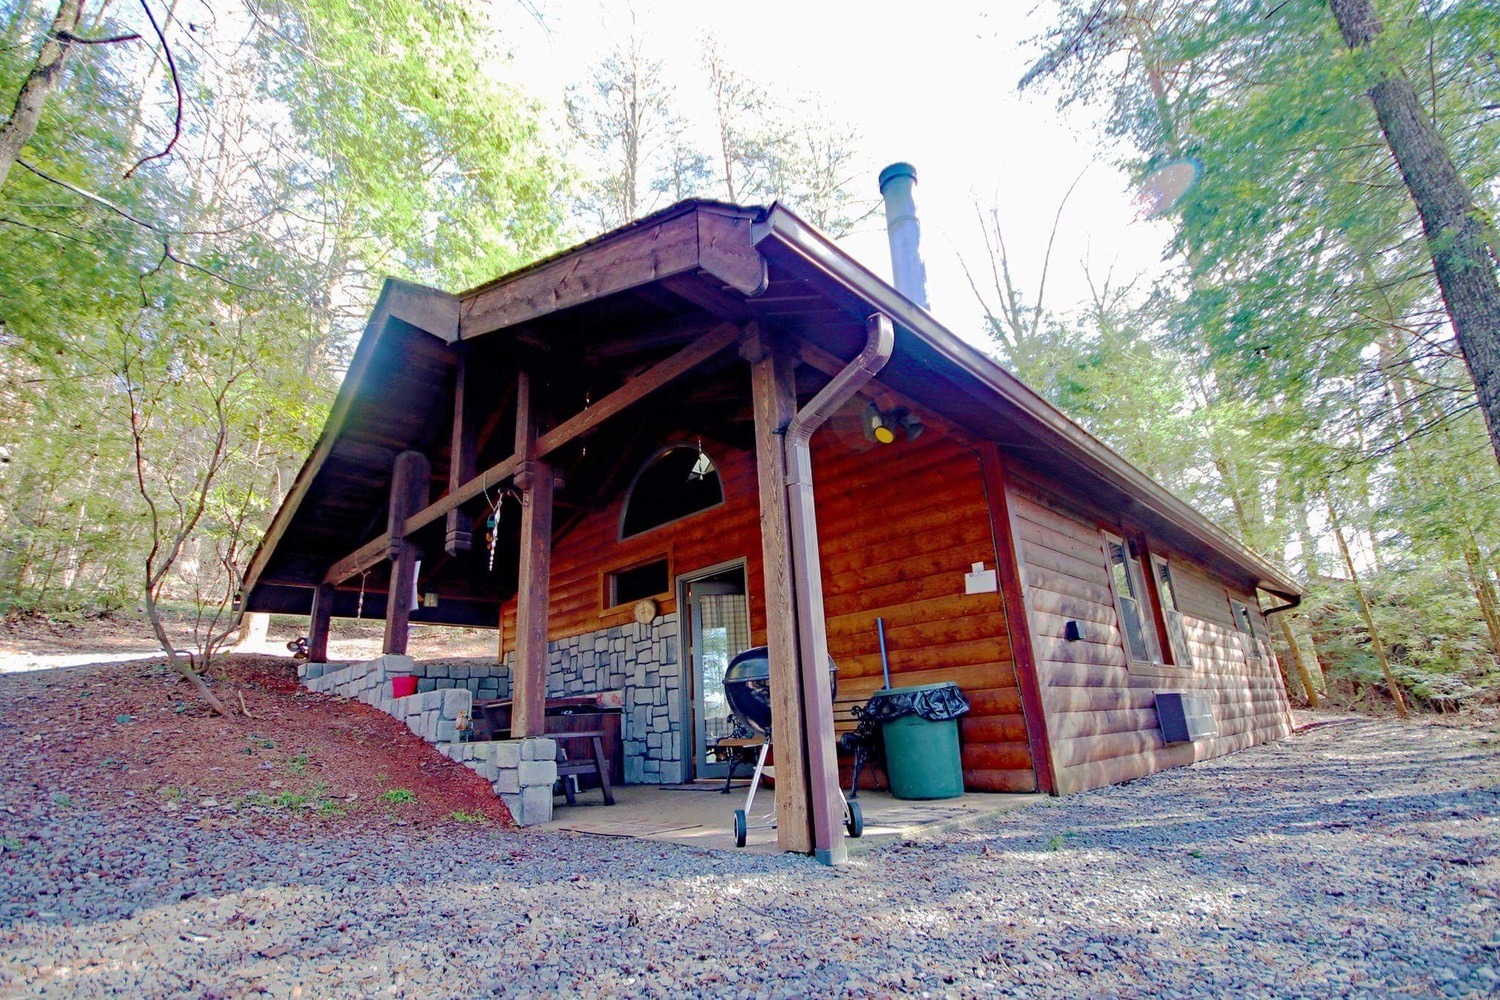 New River Gorge Cabins outside of cabin